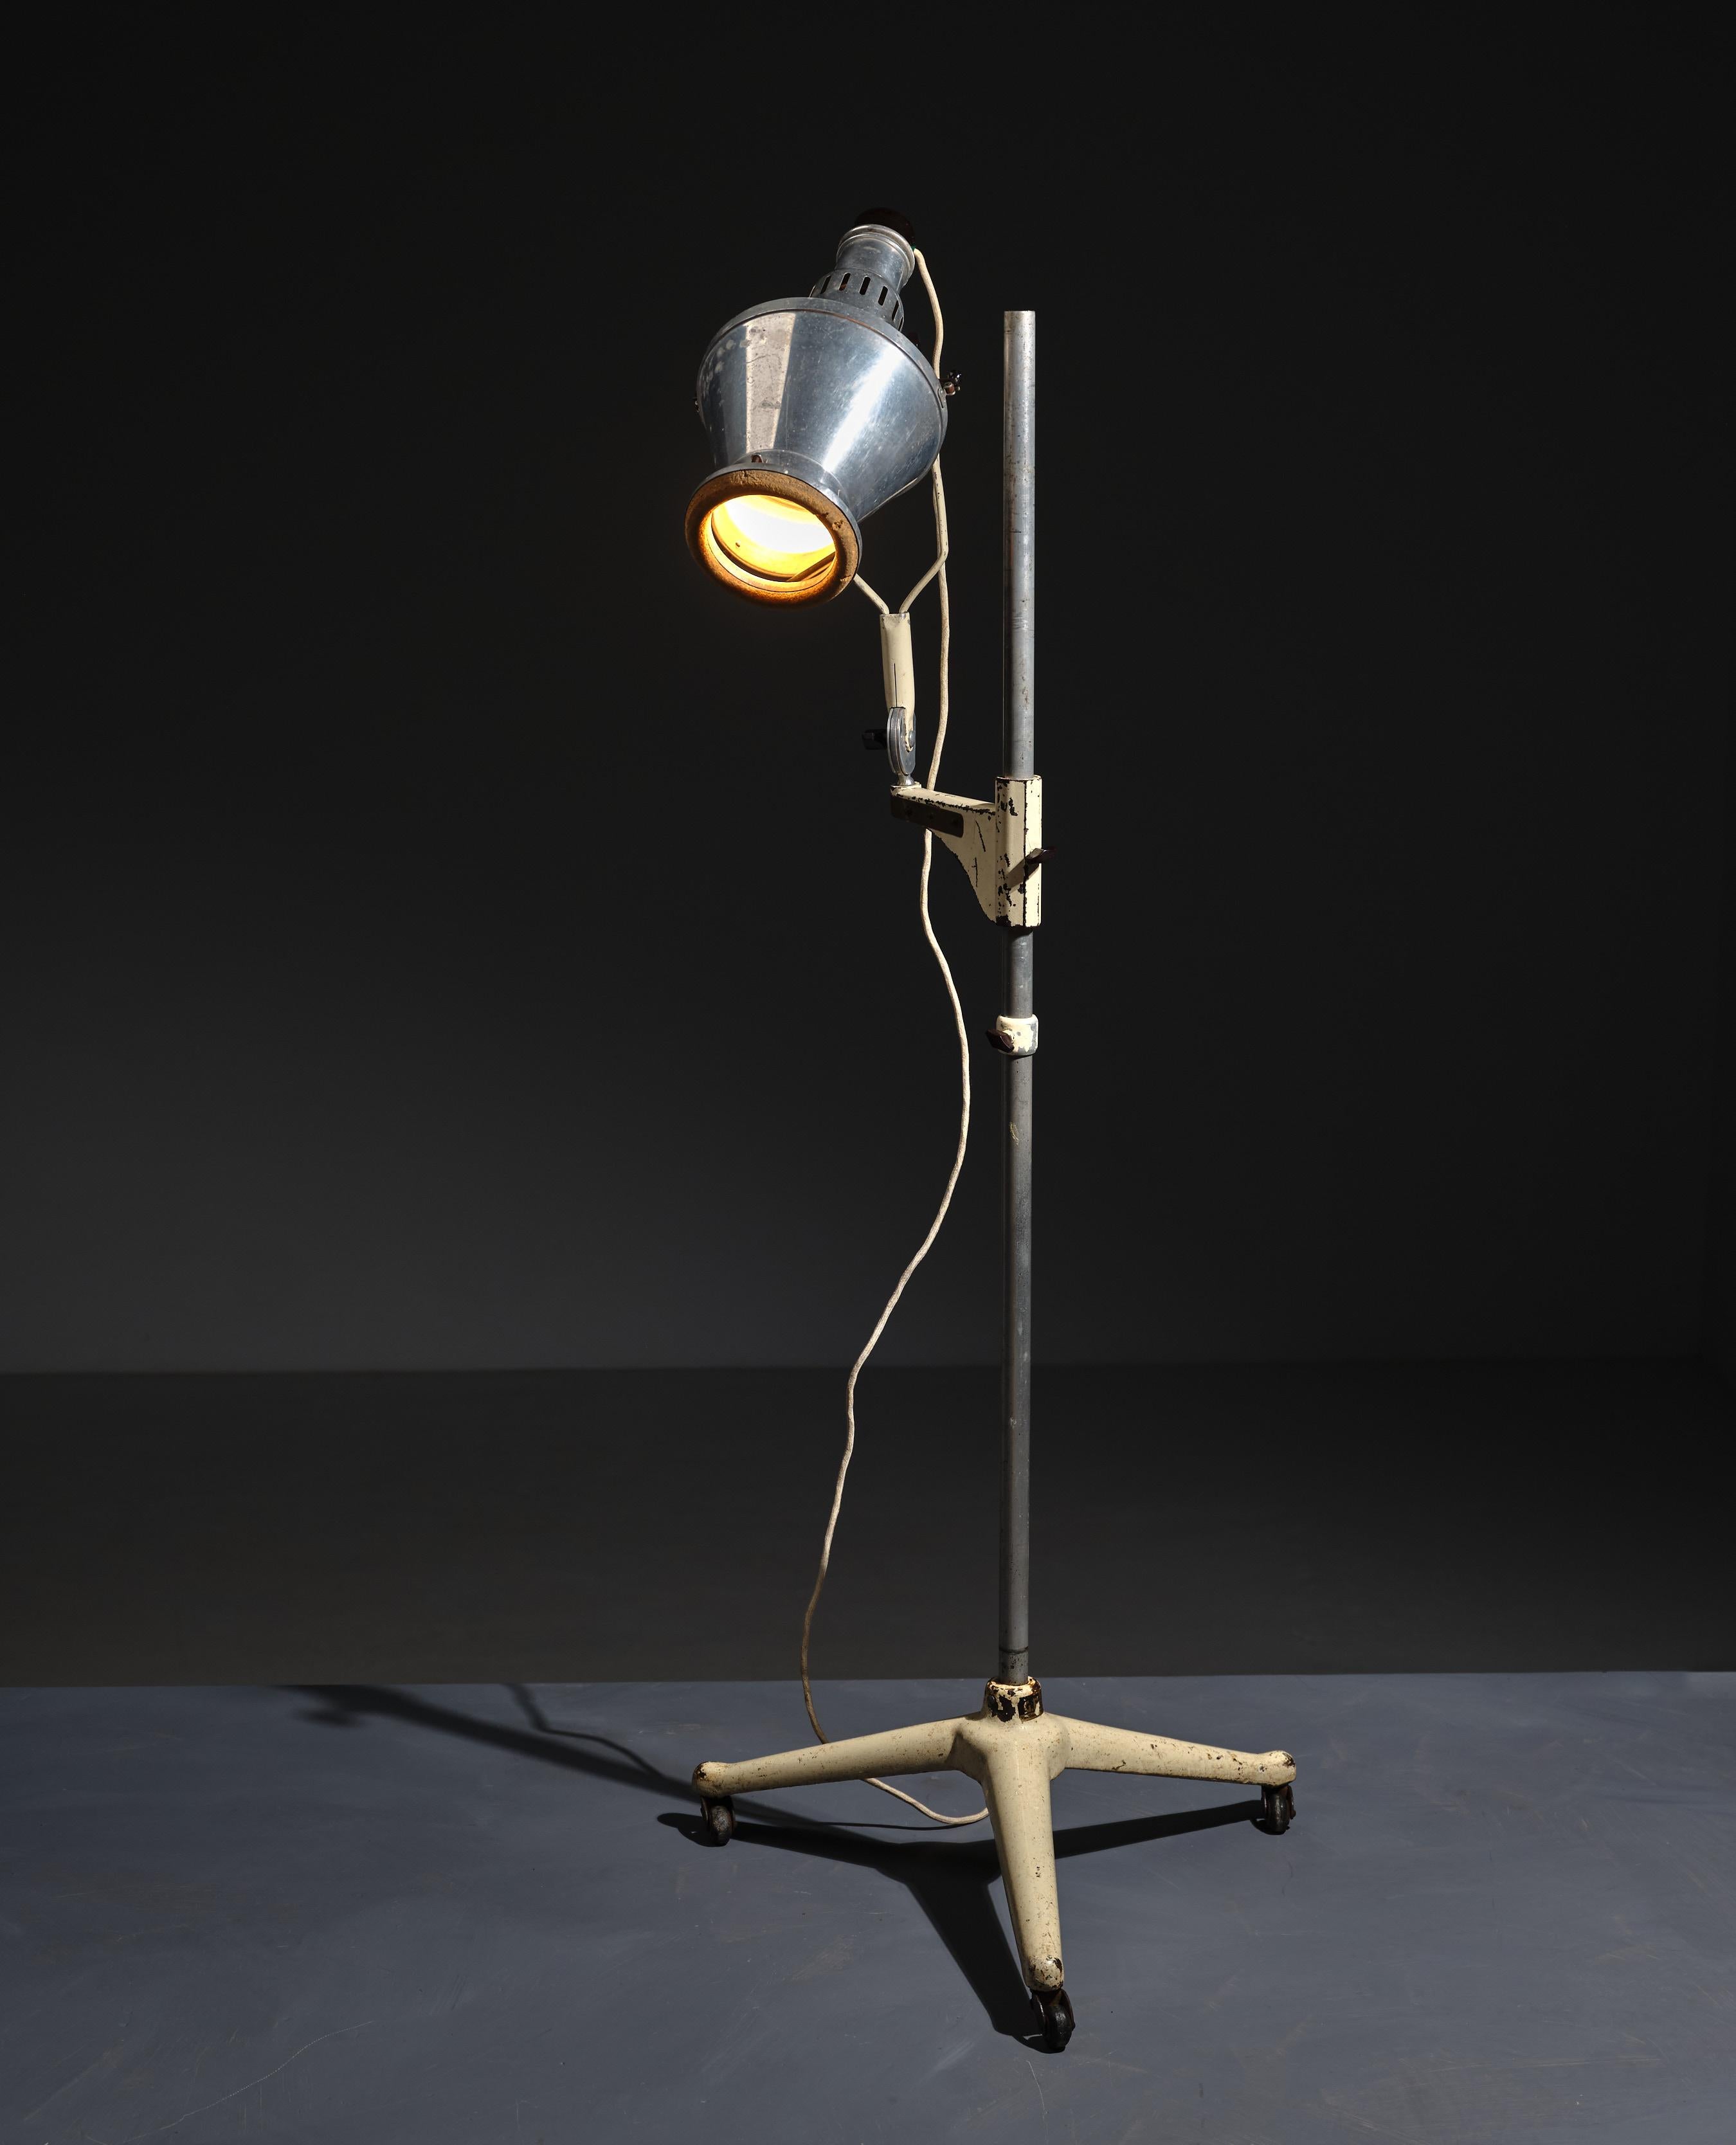 Discover a true gem of industrial design with this Original Hanau Sollux Industrial Floor Lamp from the 1930s, a prized possession for collectors and vintage enthusiasts alike. Crafted by the renowned manufacturer “Original Hanau,” this lamp